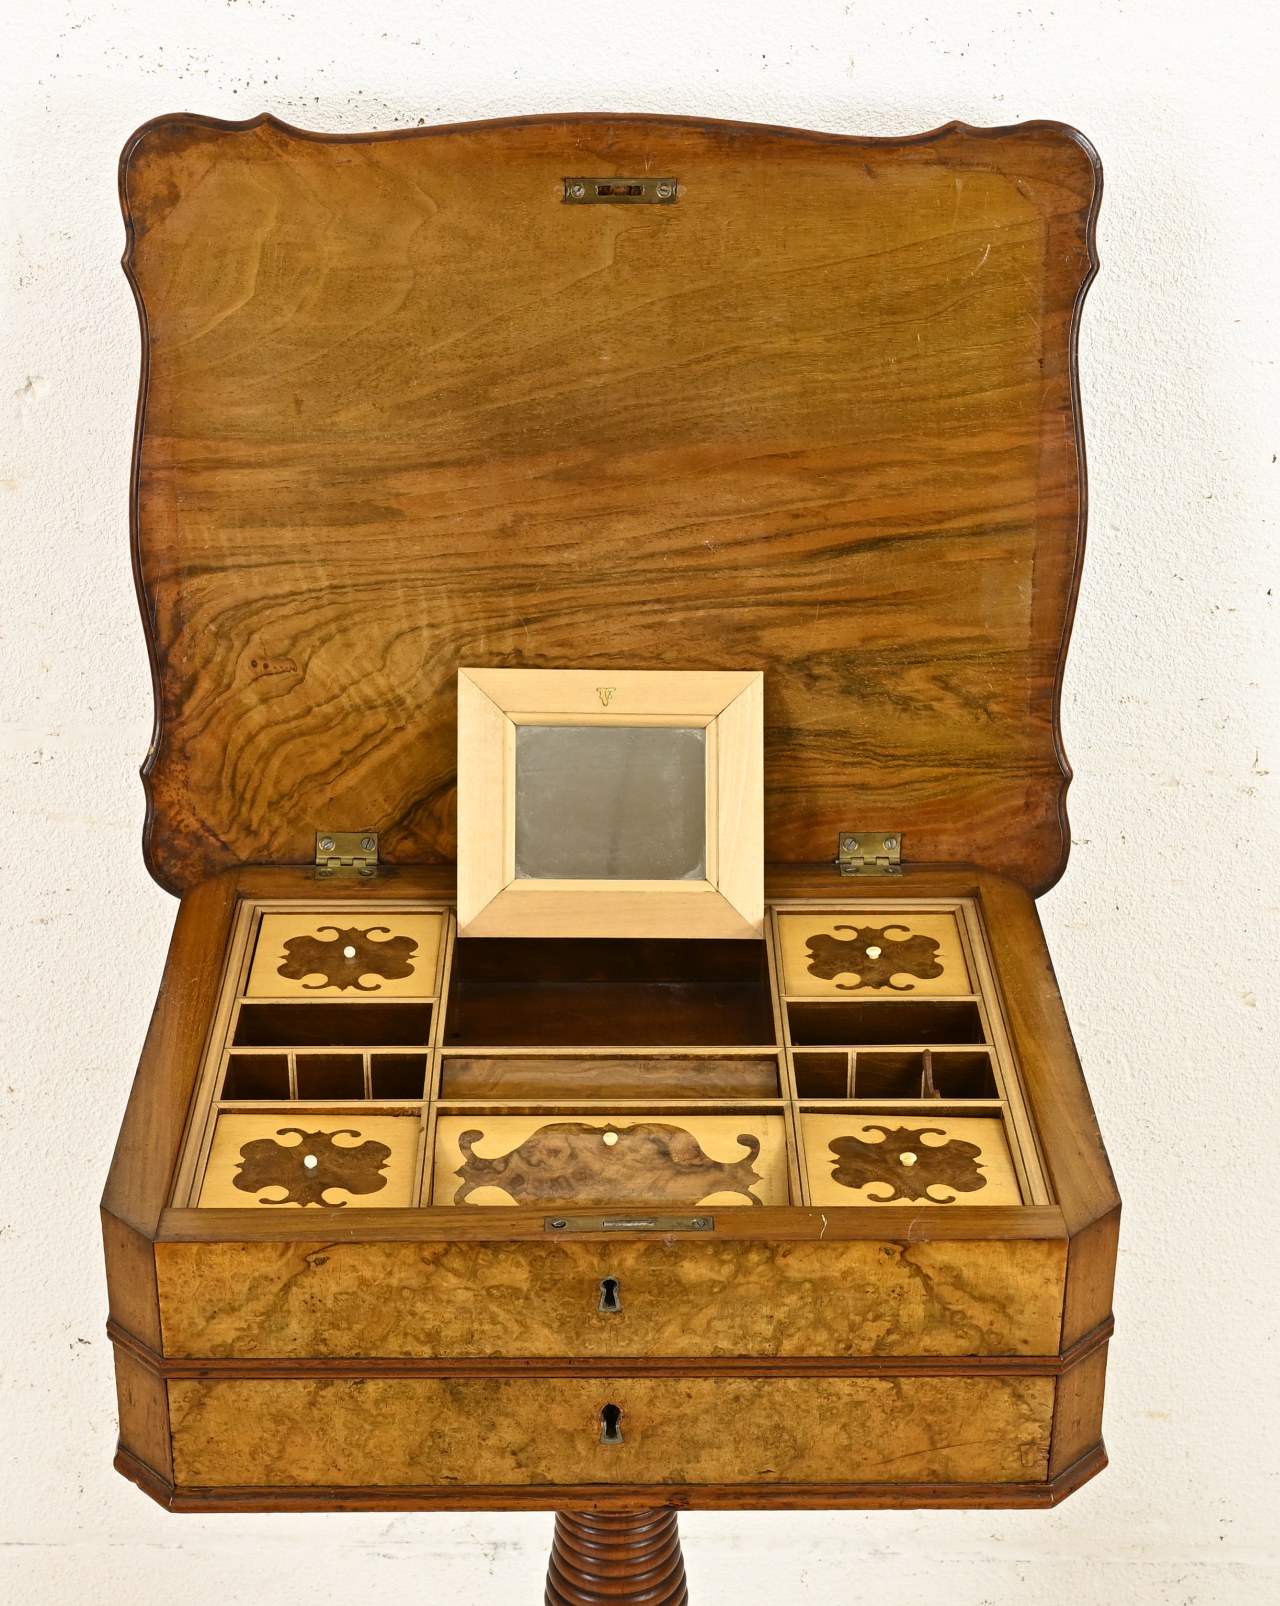 Sewing table, 1870 - Image 2 of 2